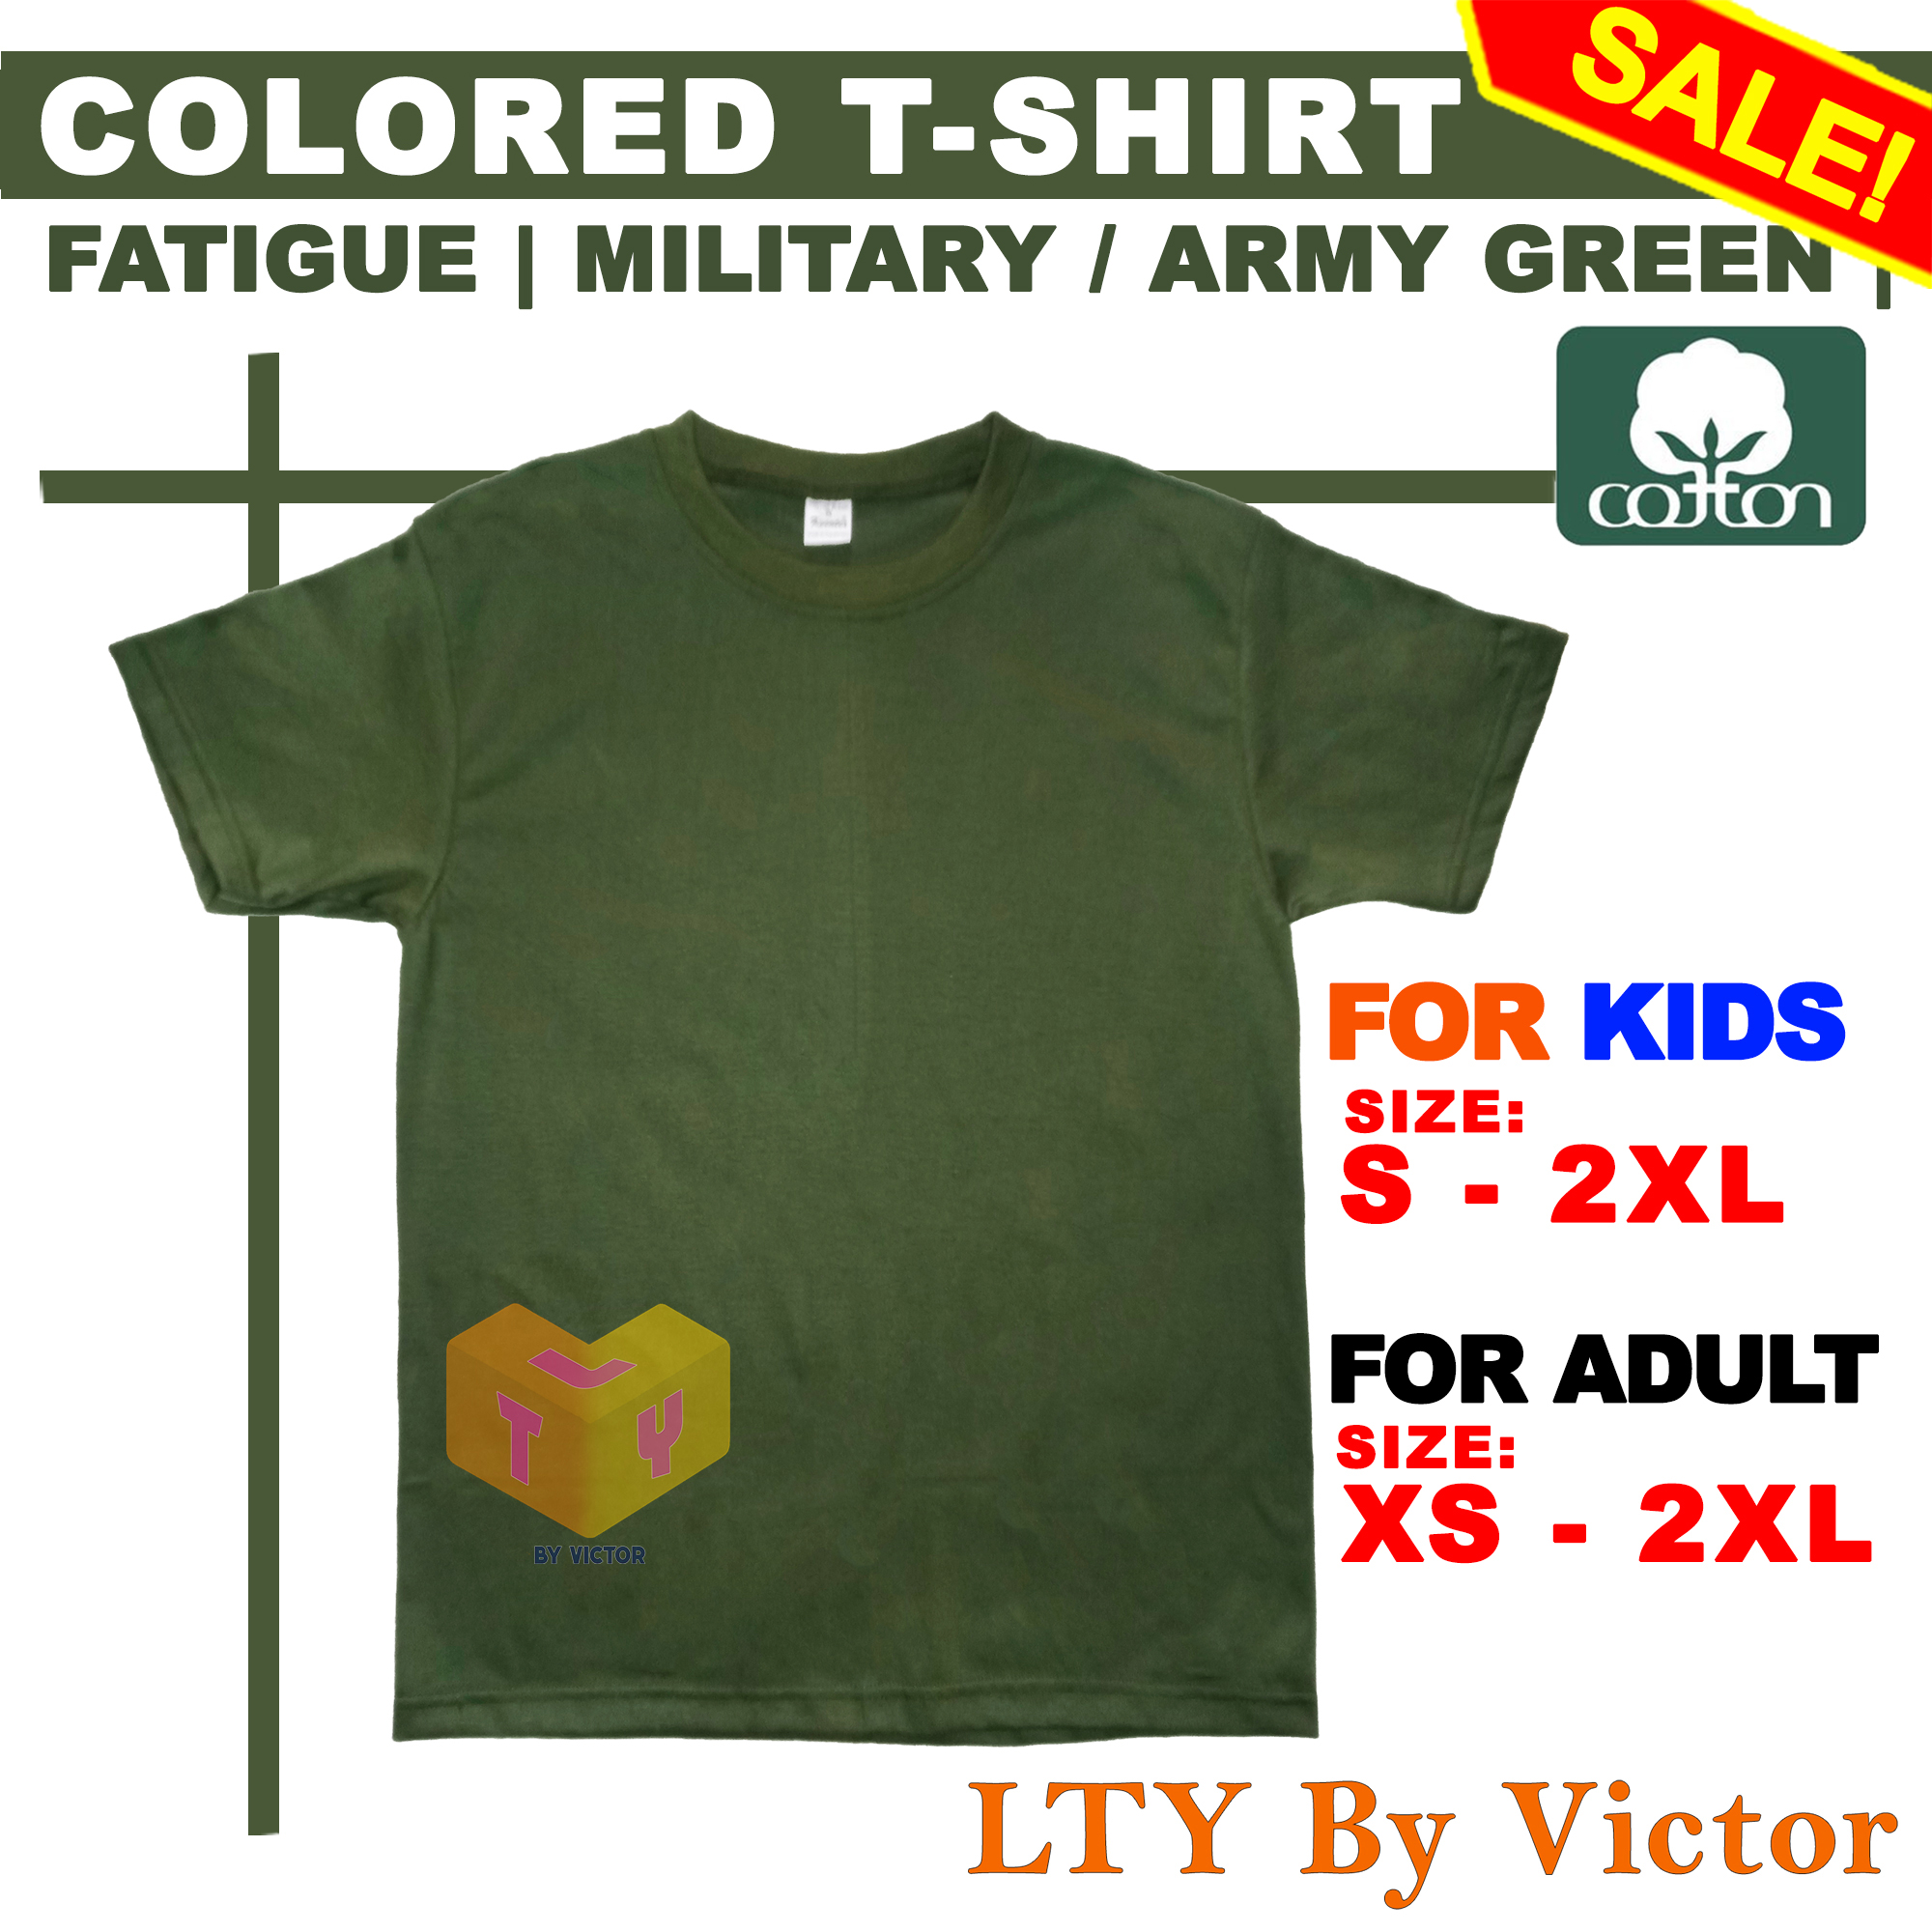 FATIGUE . MILITARY / ARMY GREEN T-SHIRT COTTON BLEND ROUND NECK